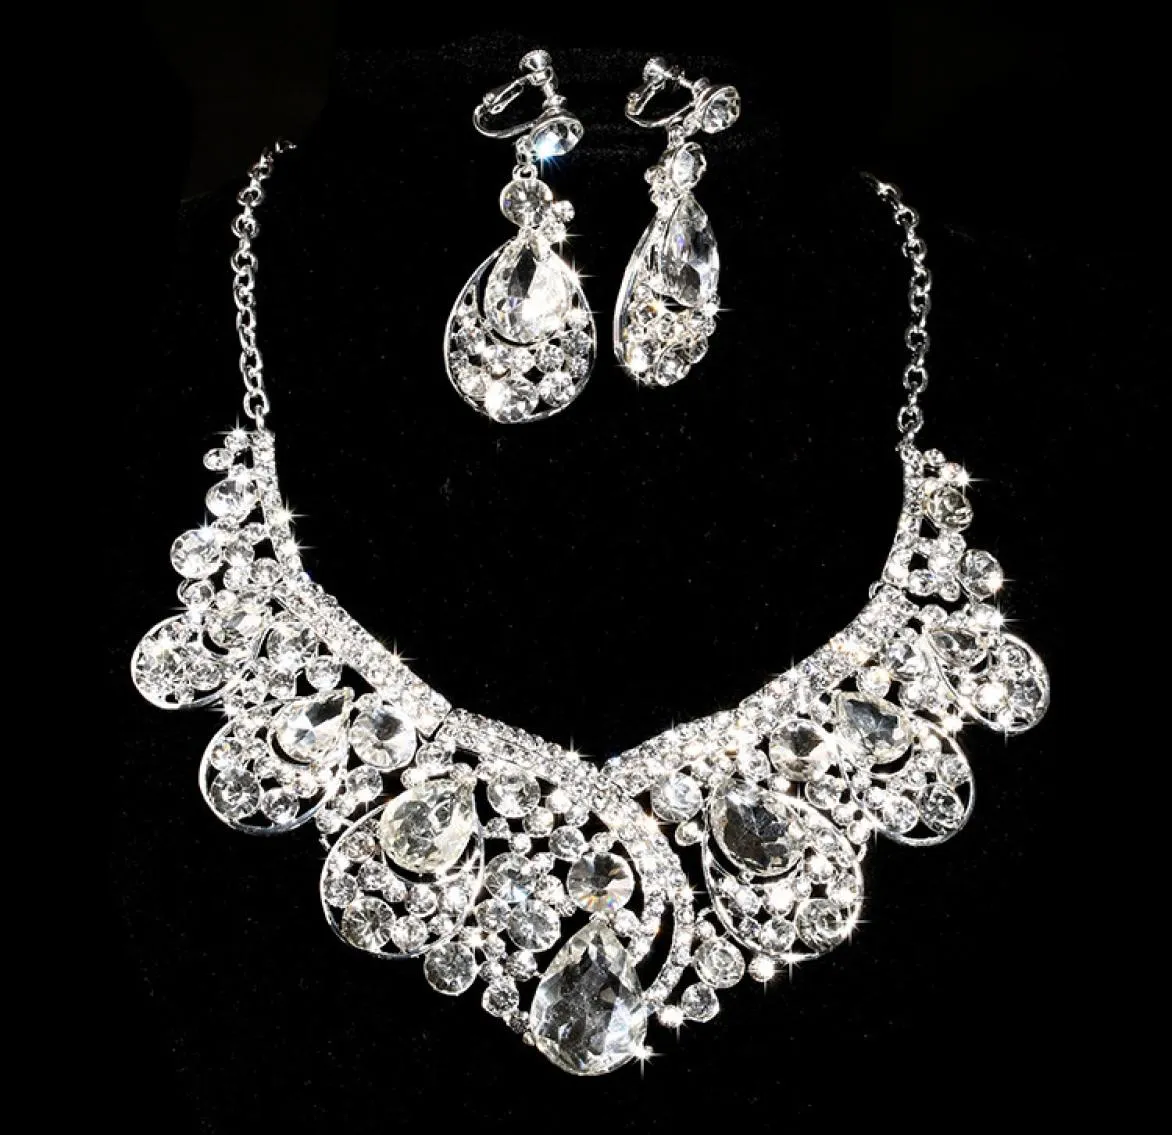 Elegant Simulated Pearl Bridal Jewelry Sets Silver Color Crystal Necklaces Earrings Sets Wedding Jewelry Fashion Jewelry Sets8557945